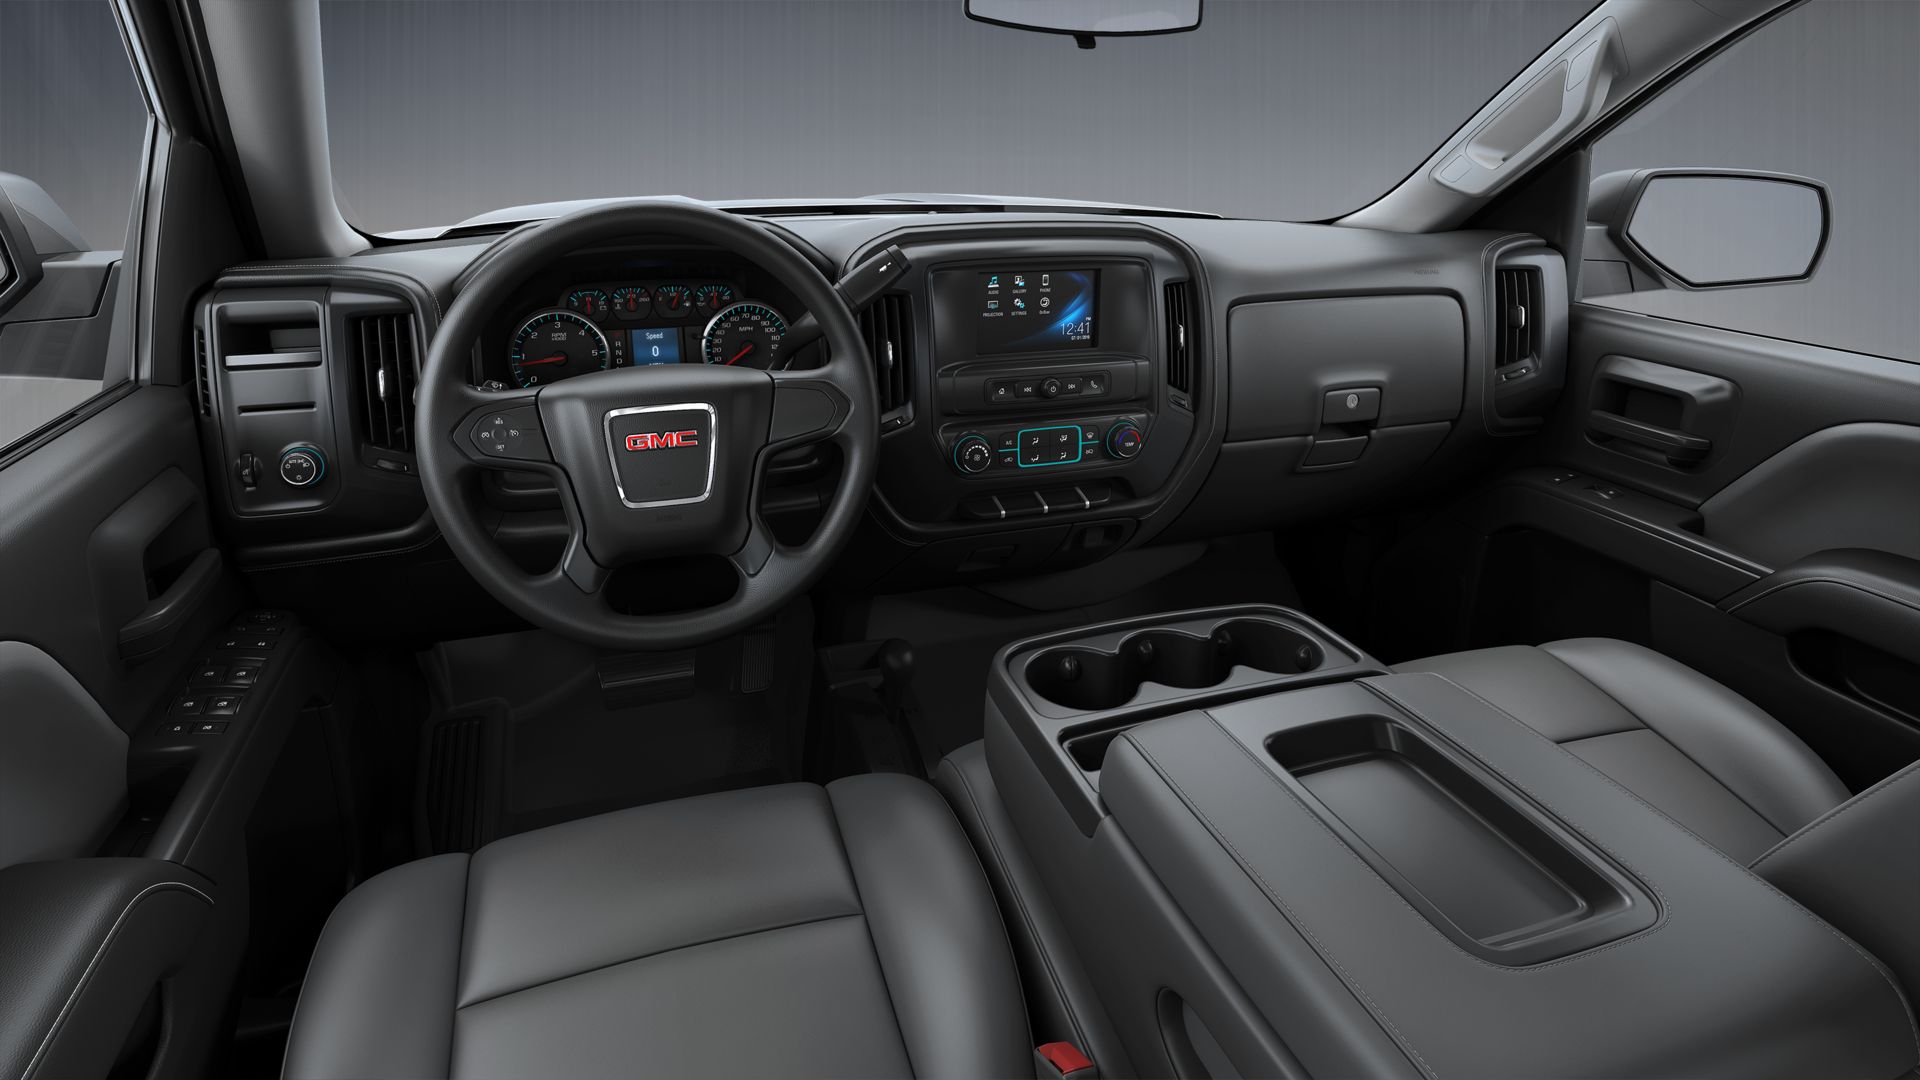 2019 Gmc Sierra Limited Interior Colors Gm Authority